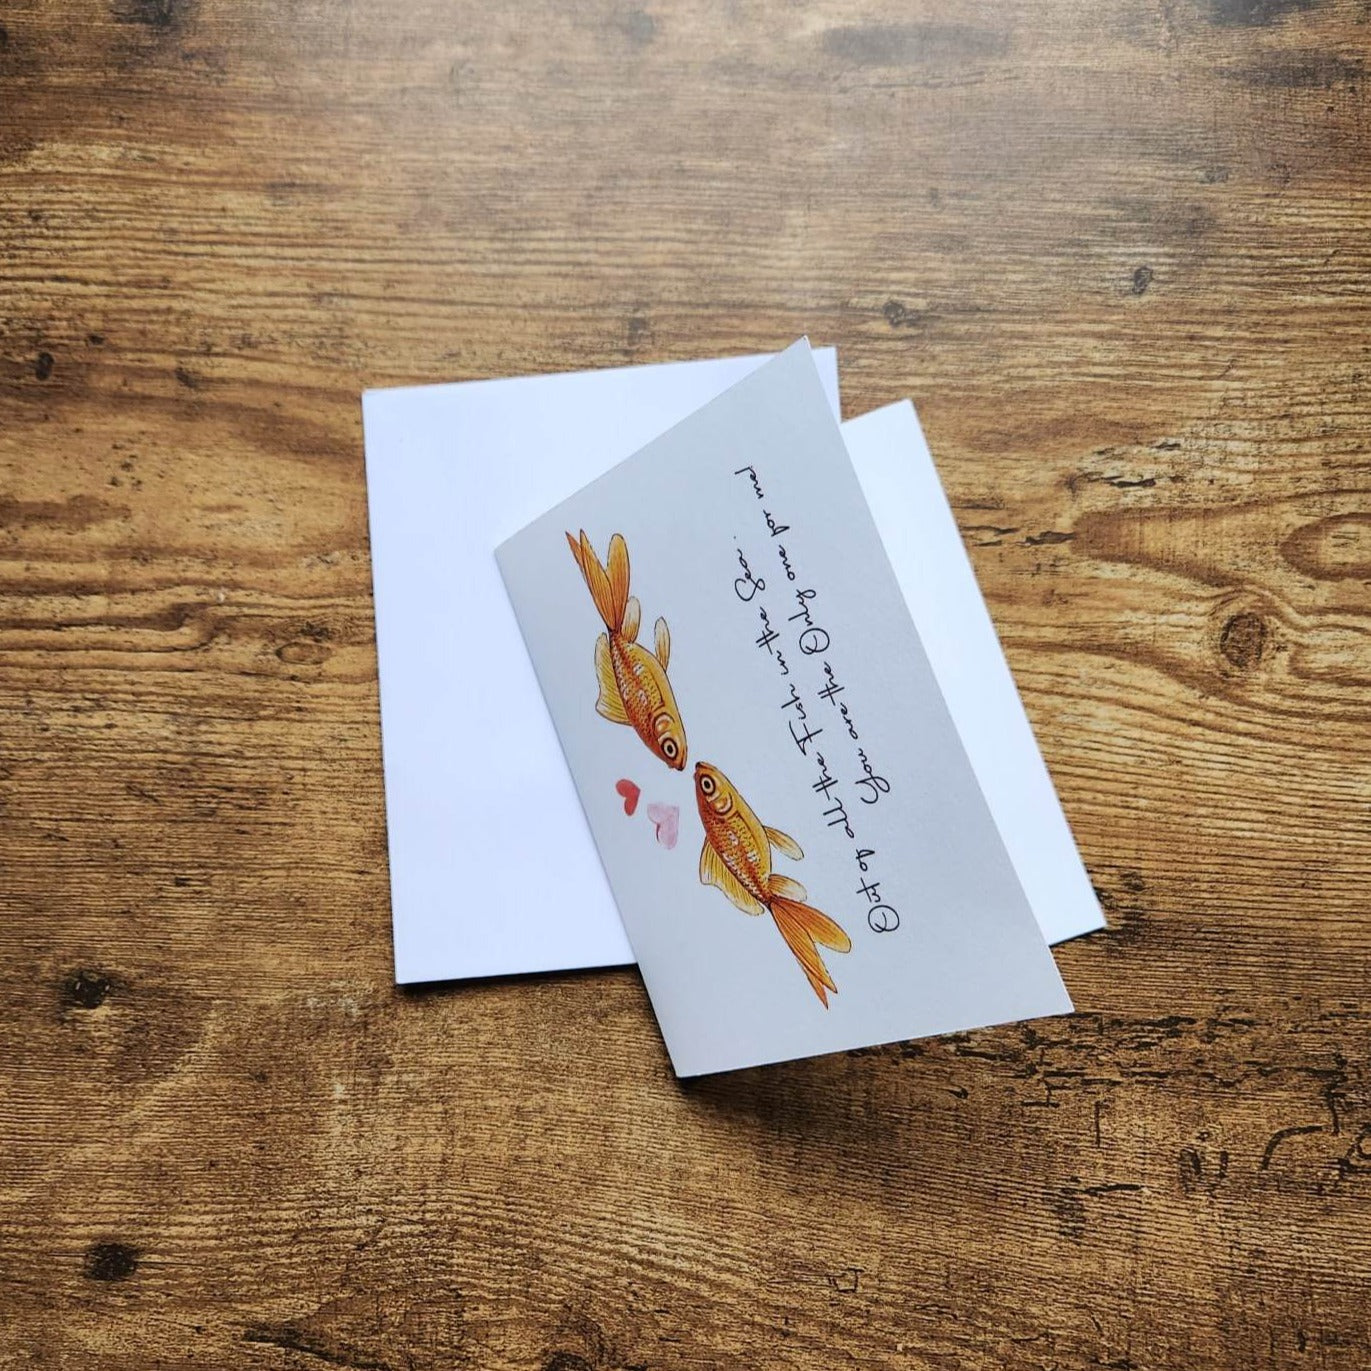 Out of all the fish in the sea, You are the only one for me card, Love card, Anniversary card, Couple card, Card for wife, Card for husband